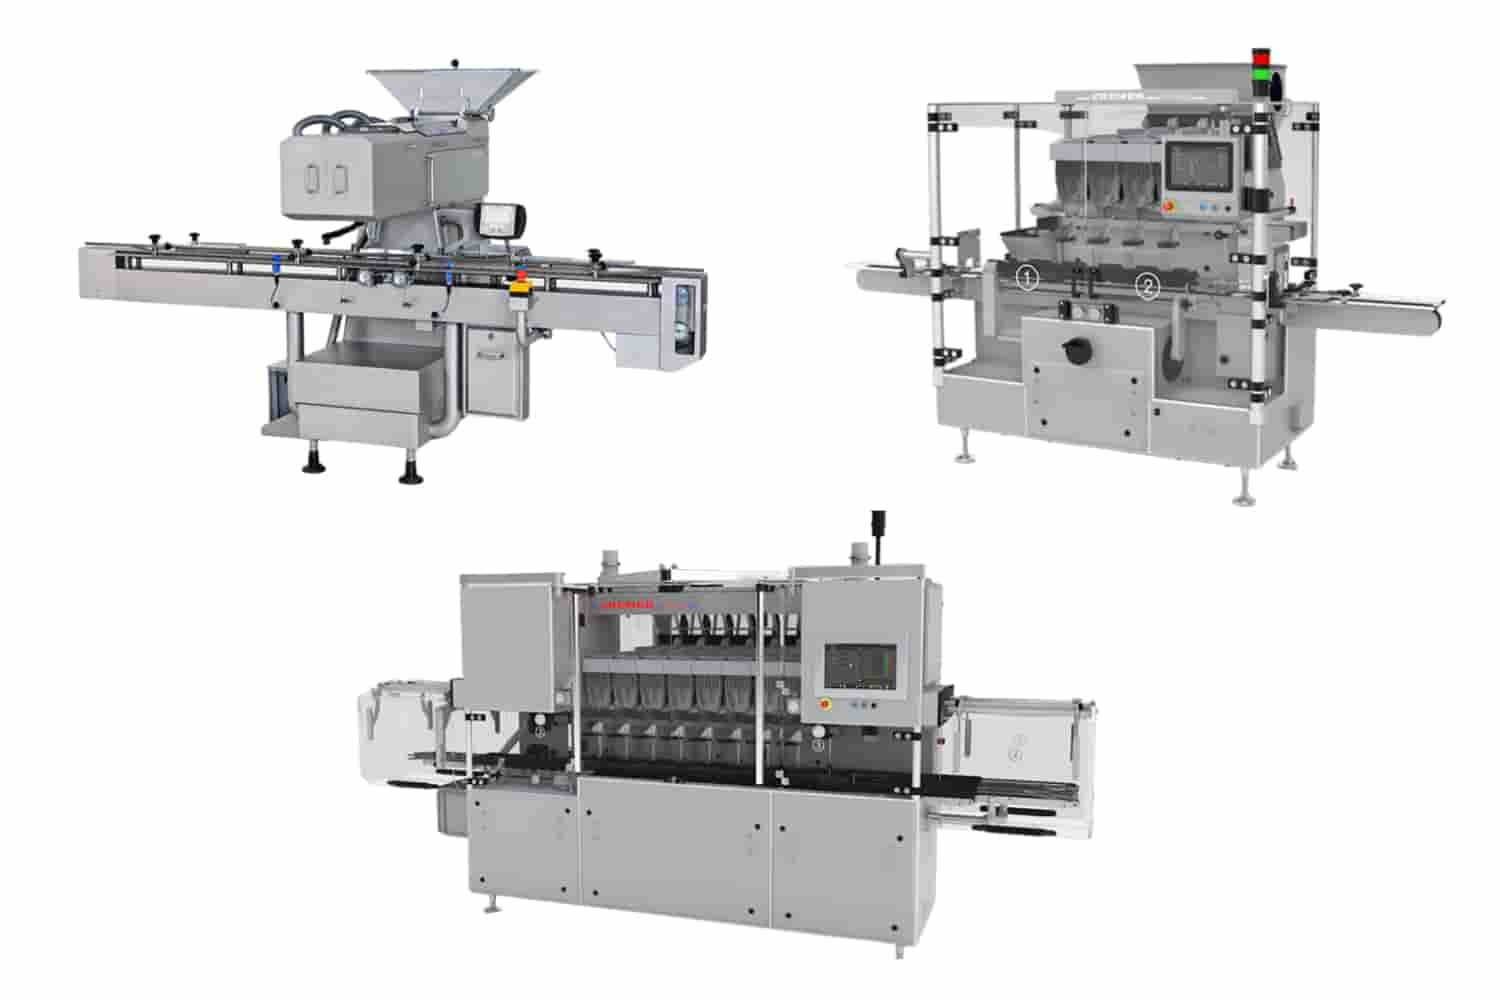 Neostarpack Co., Ltd. - Filling, capping labeling machine tablet counter  into bottling solutions by Neostarpack.